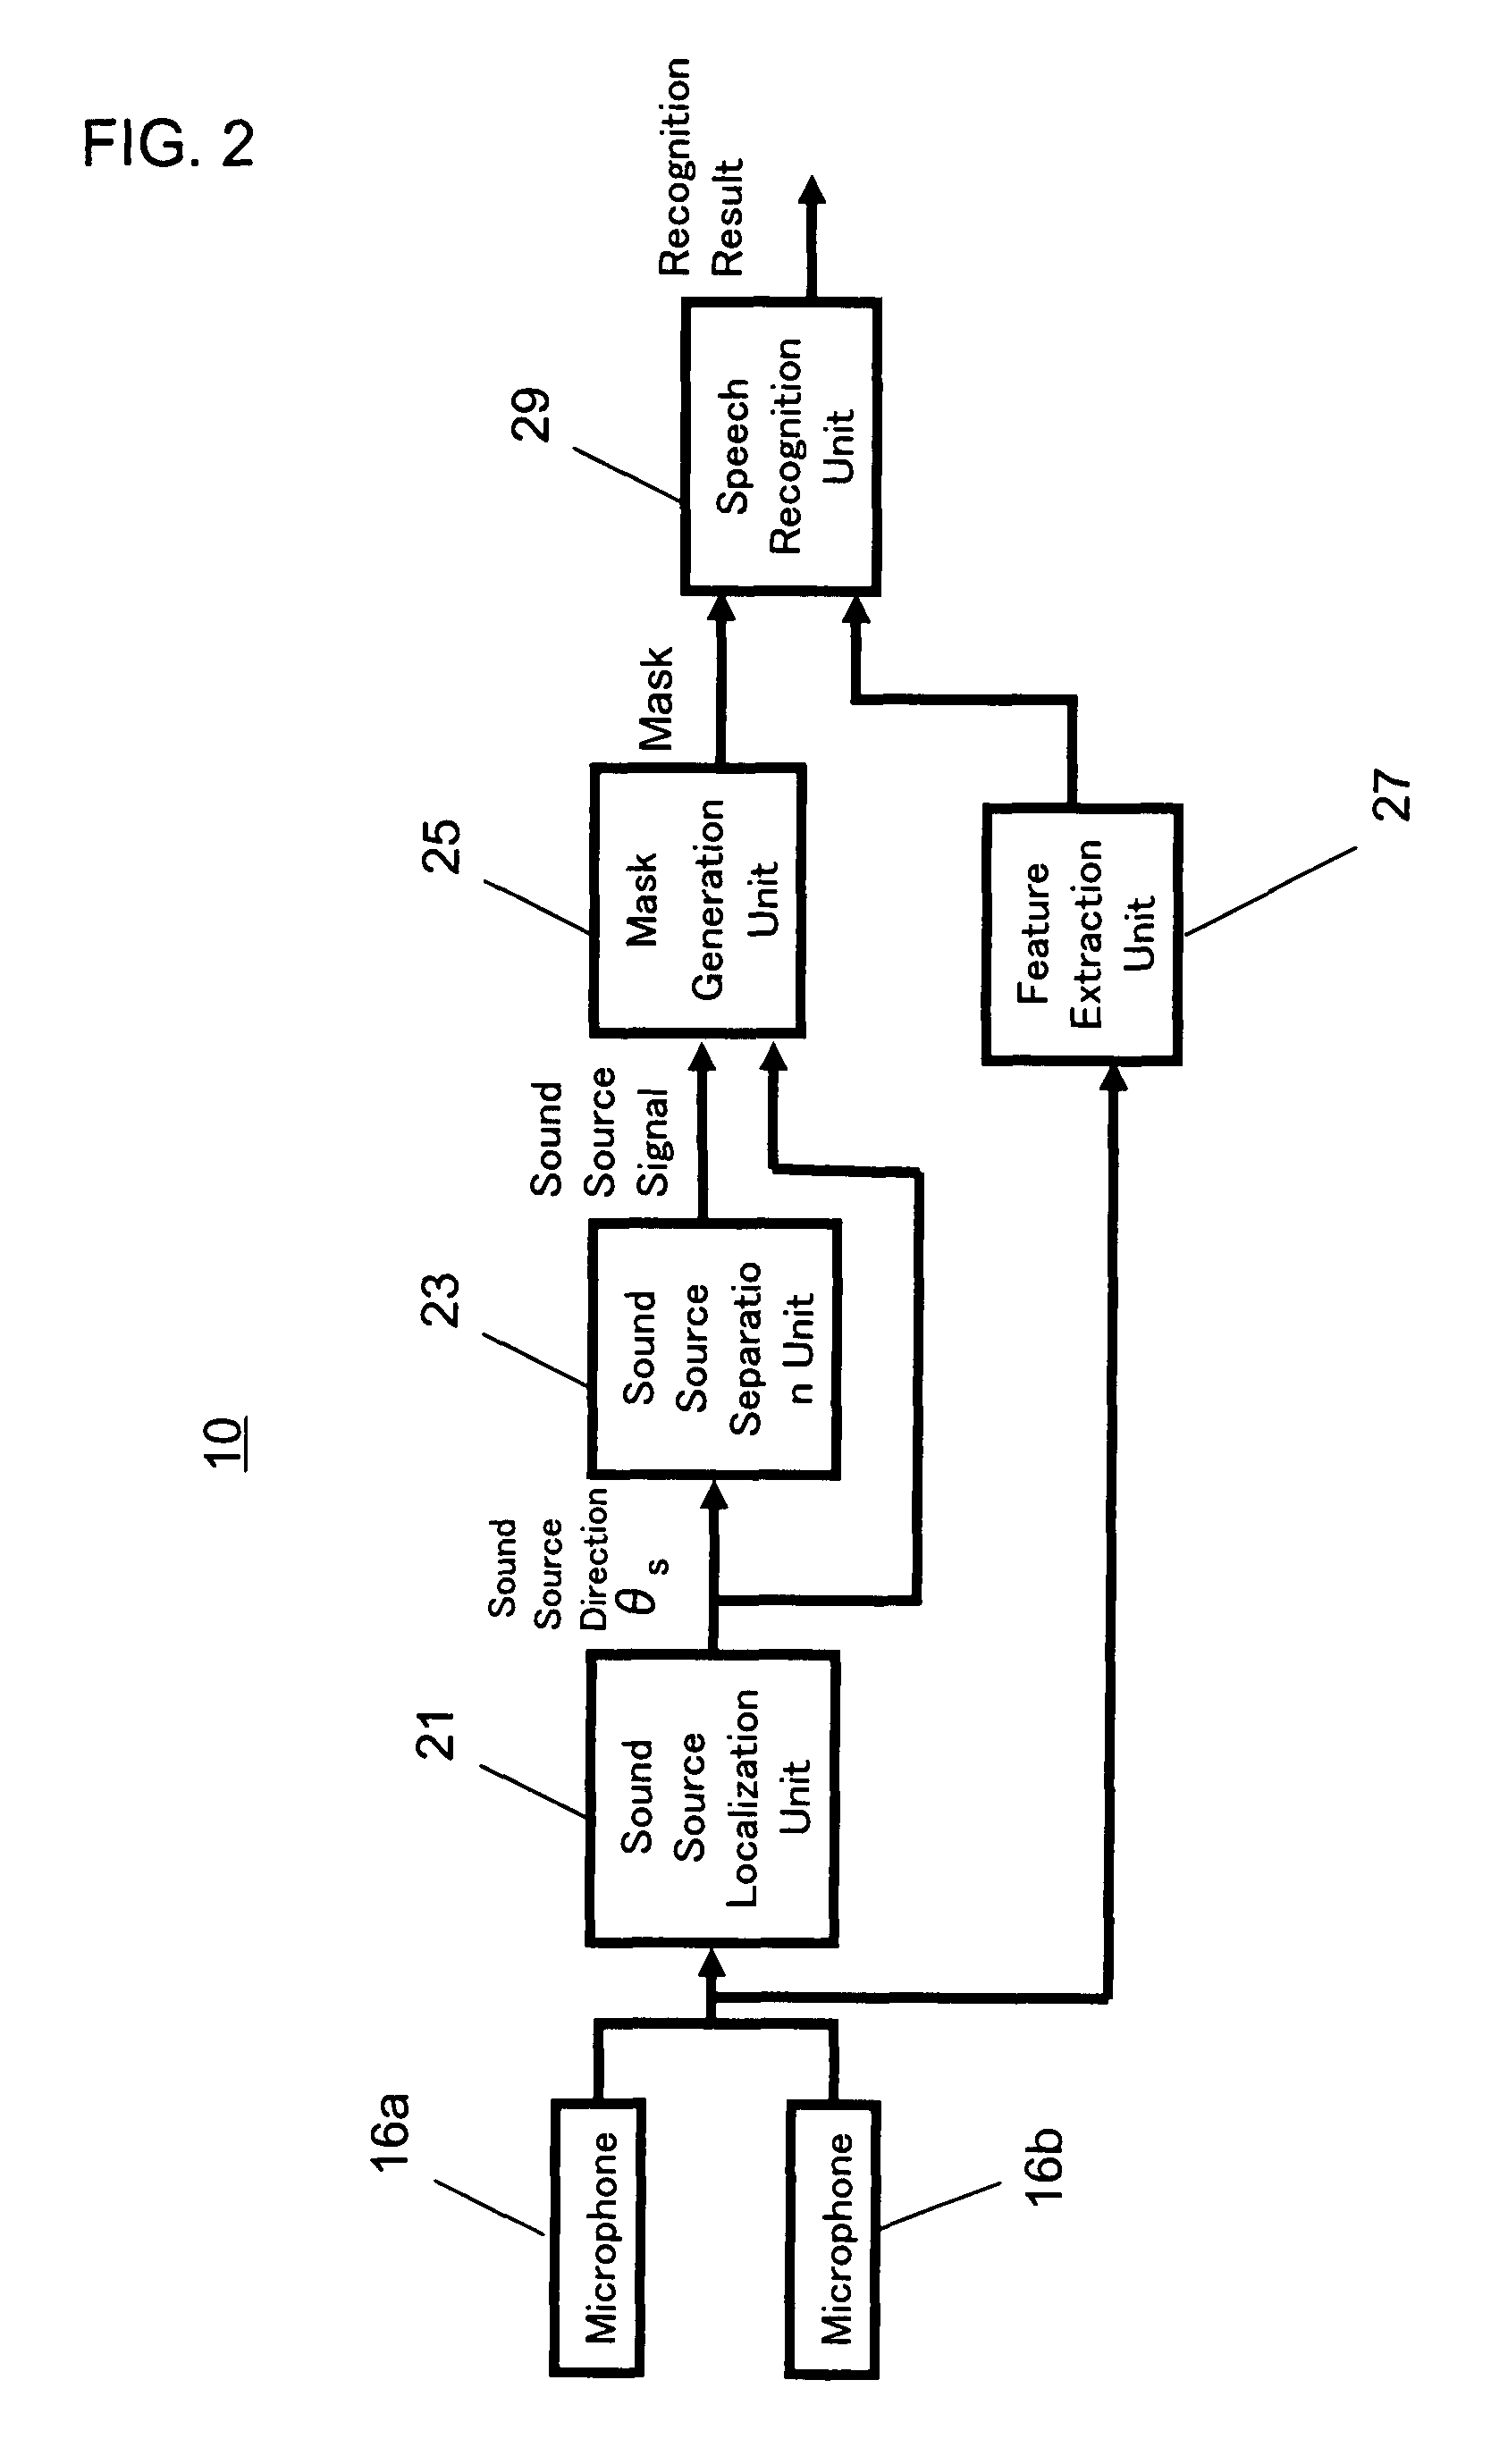 Speech recognition apparatus and method recognizing a speech from sound signals collected from outside